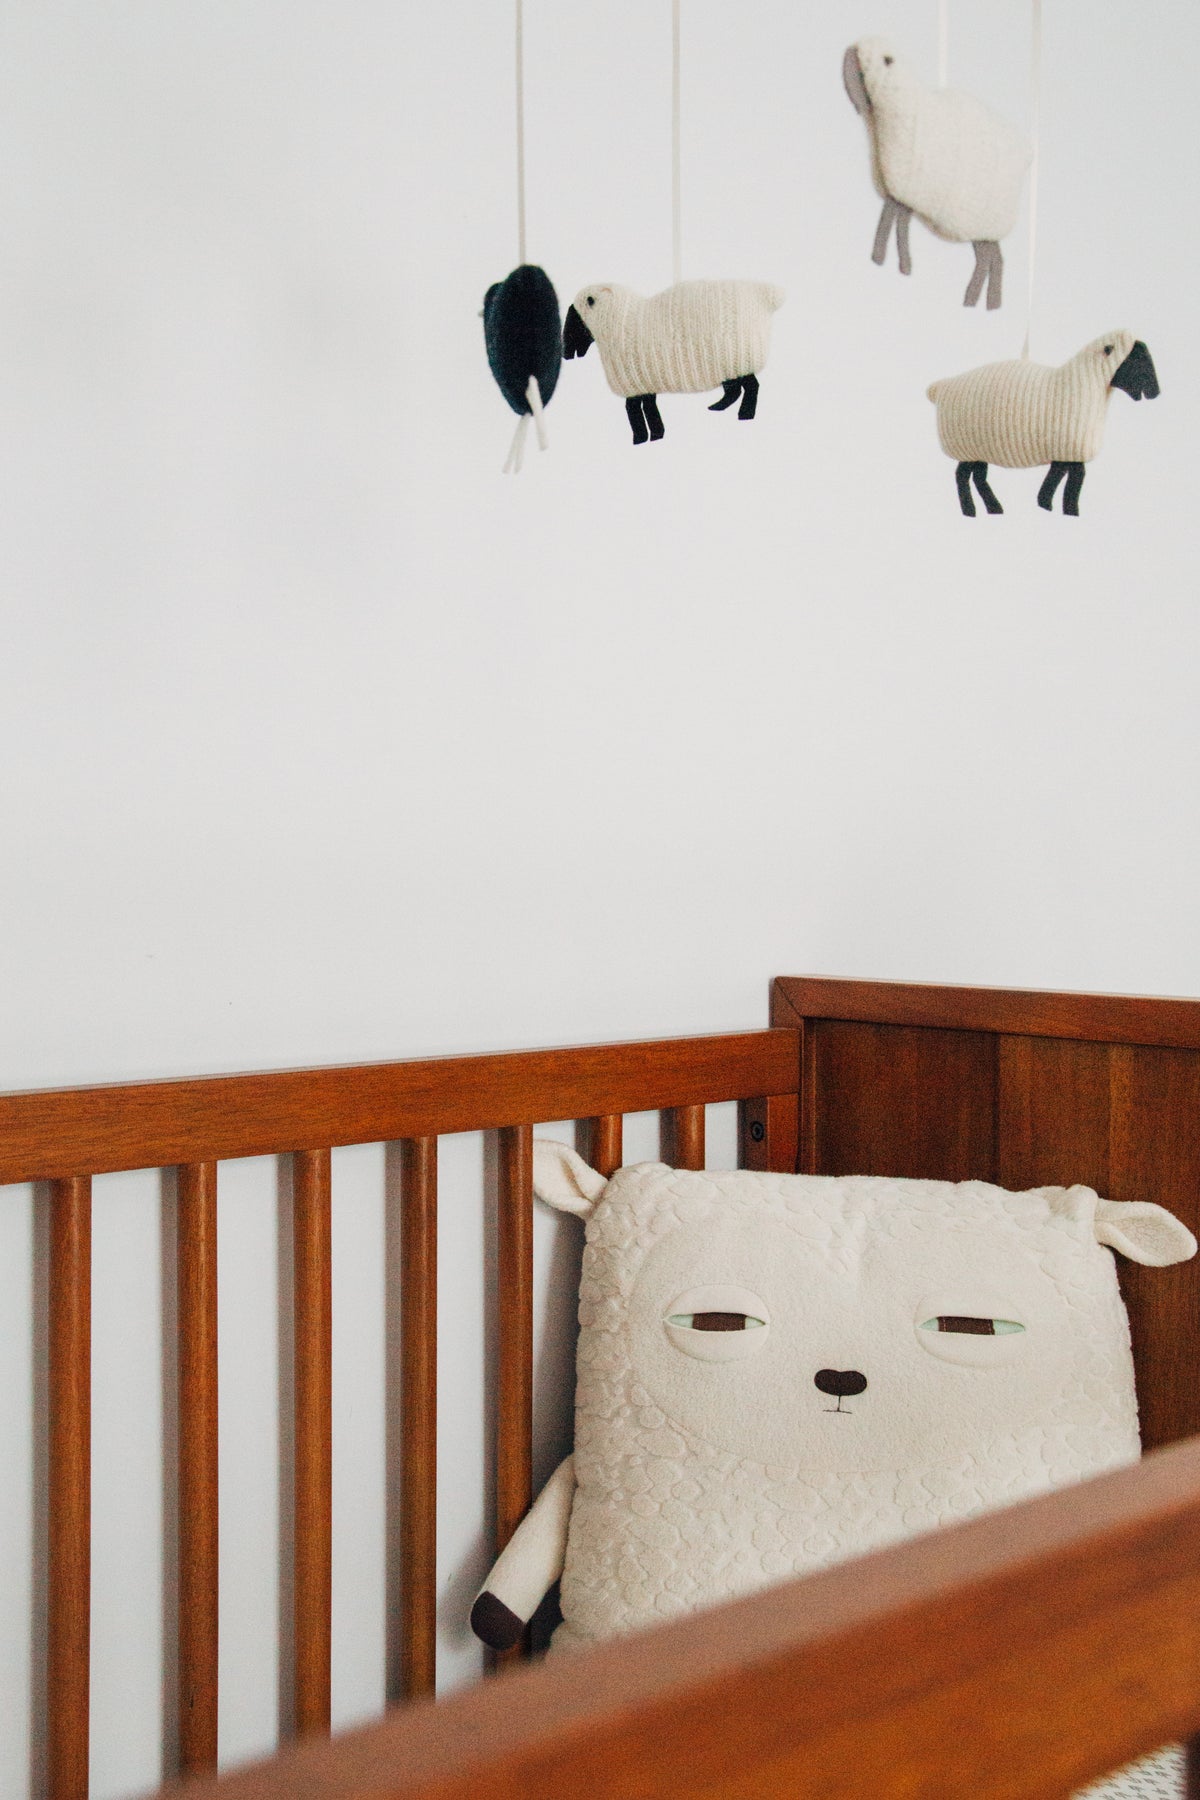 Why You Should Buy Solid Wooden Cribs From Green Cradle